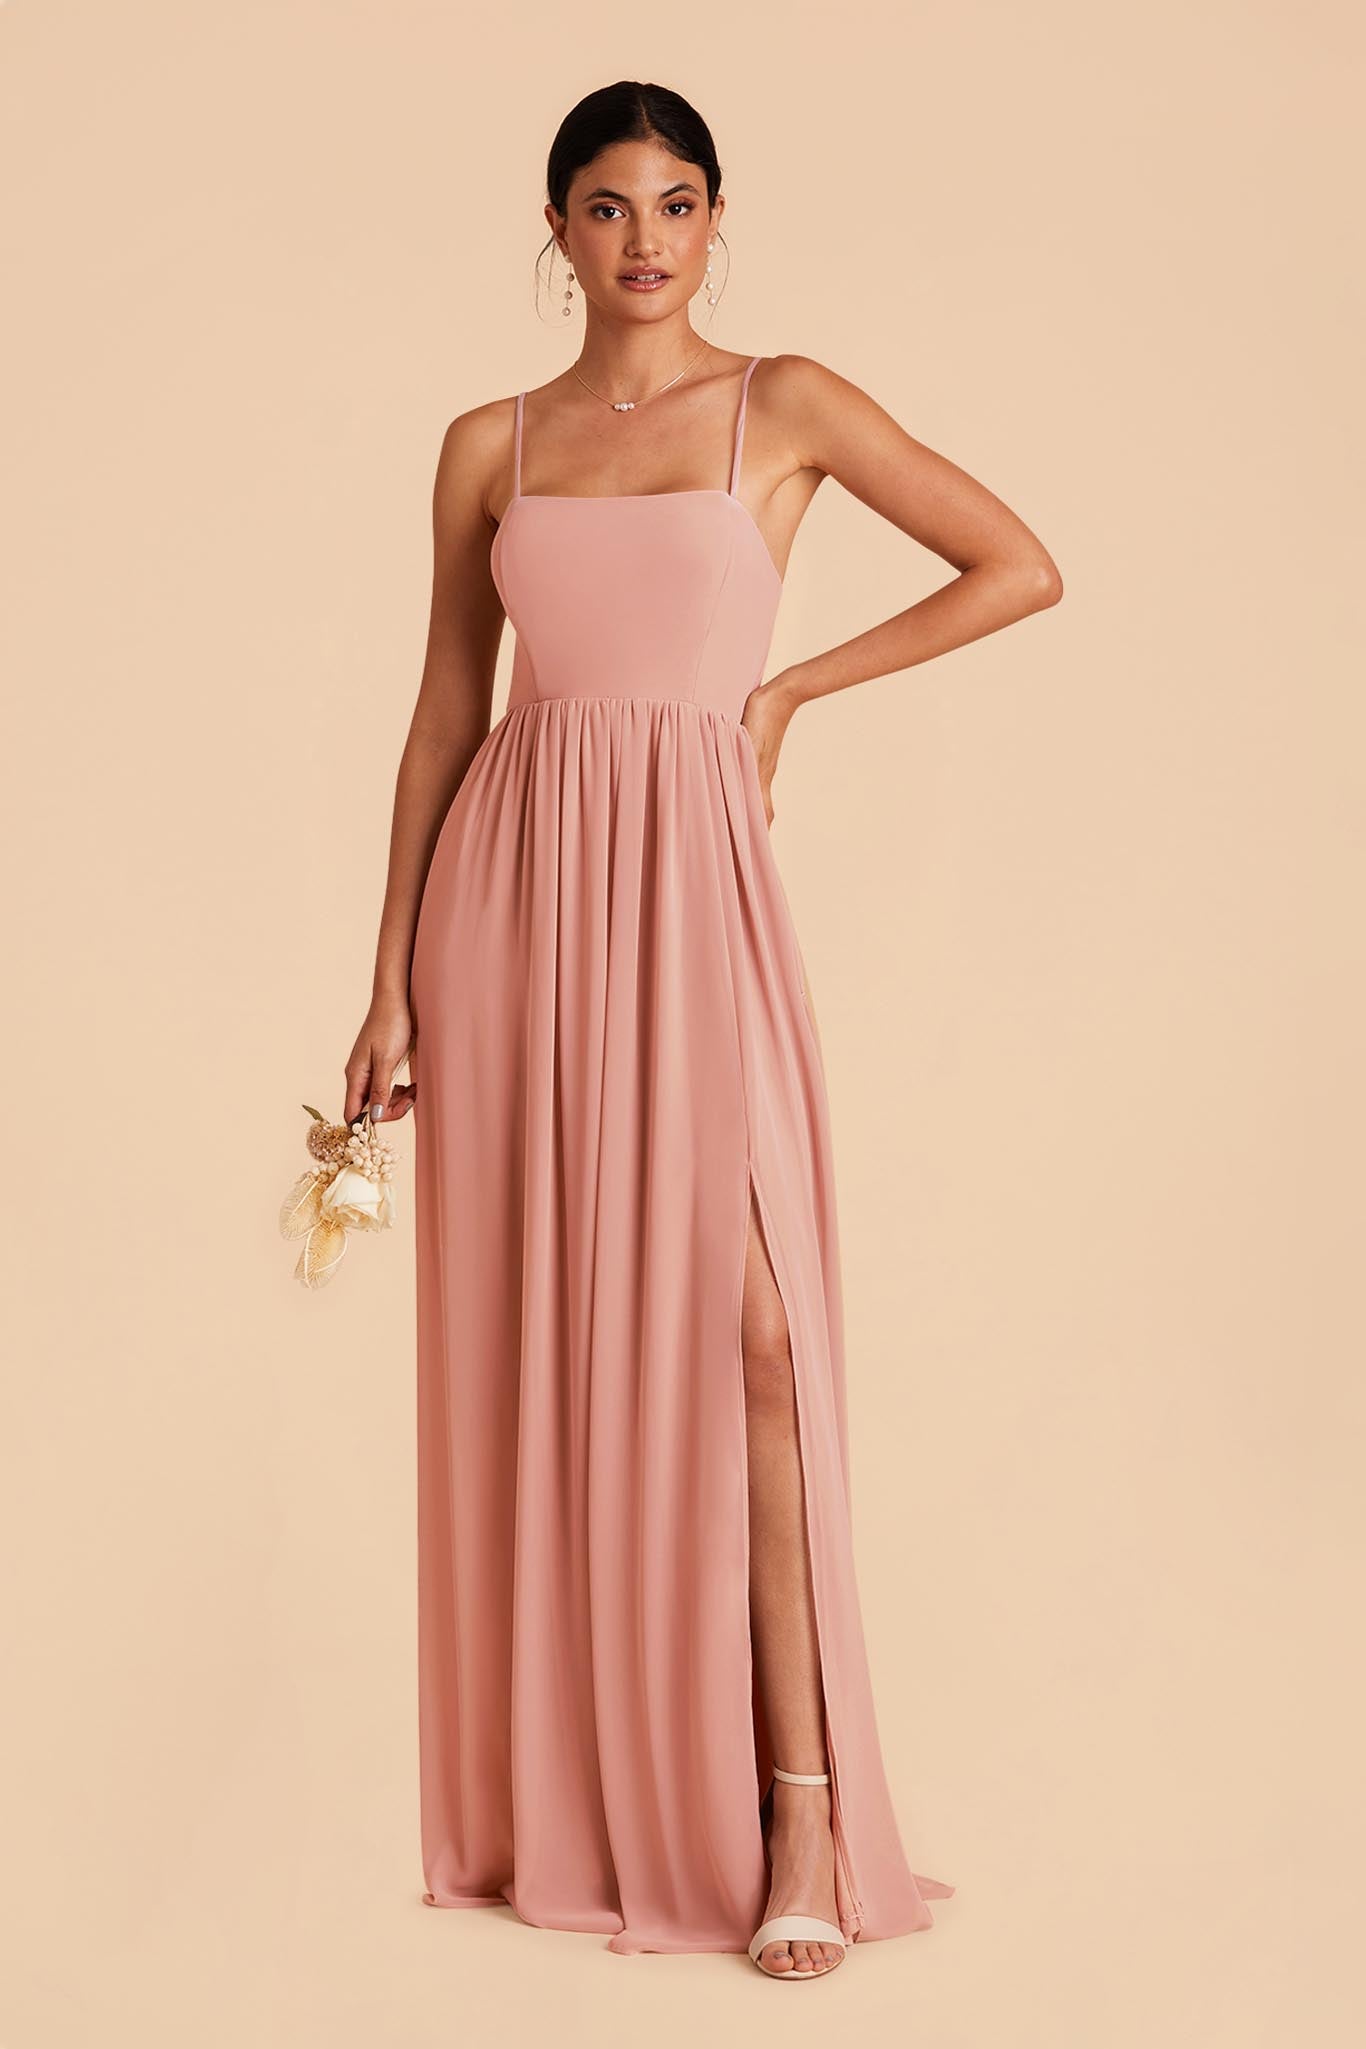 Dusty Rose August Convertible Dress by Birdy Grey